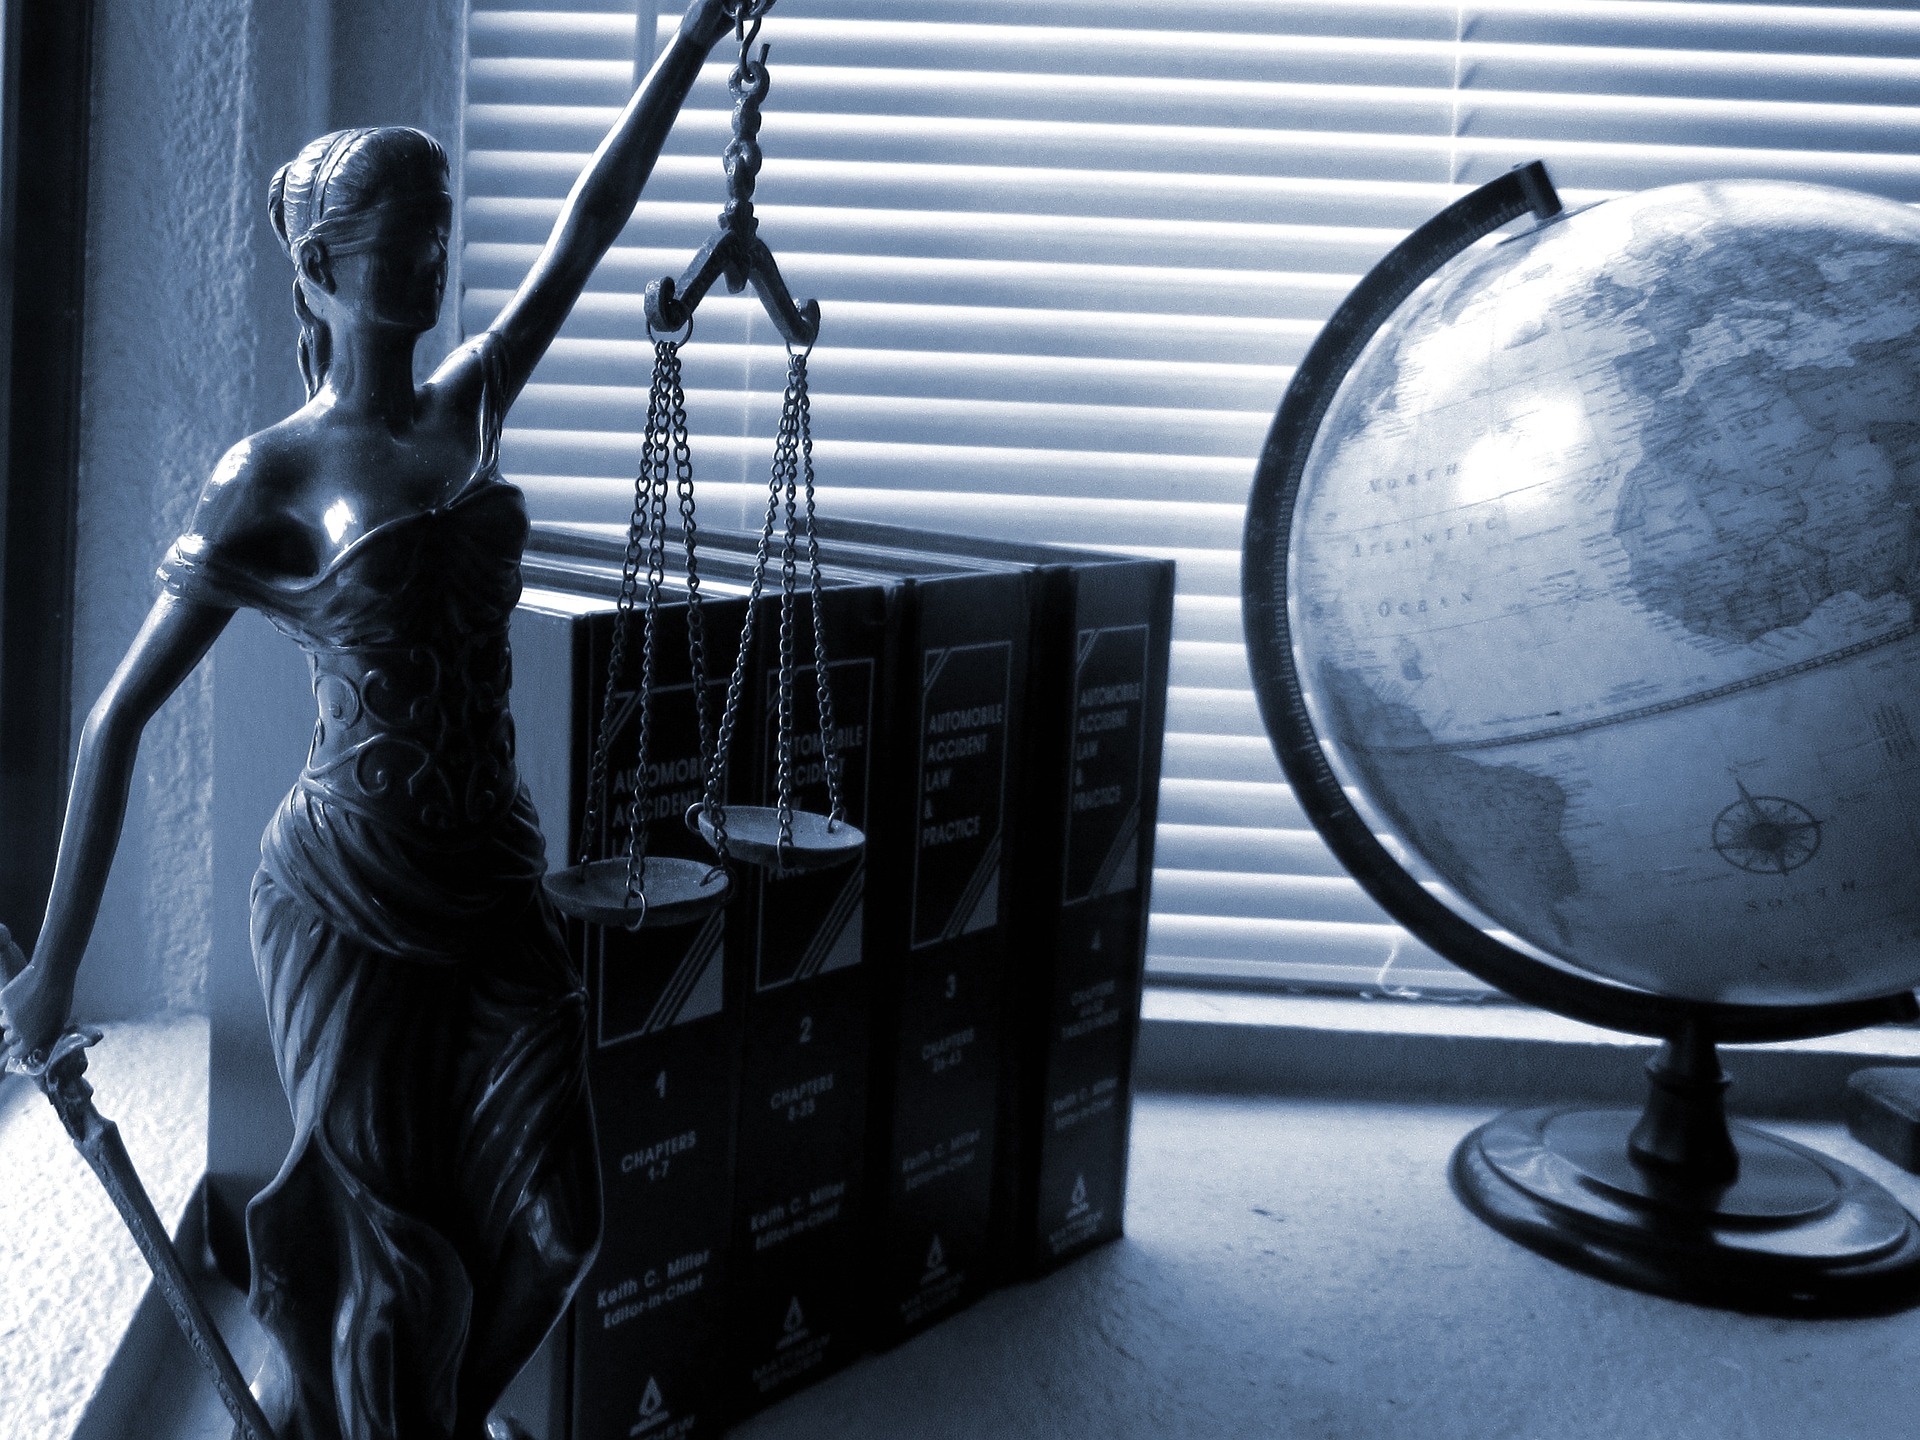 The scales of justice next to some books and a globe